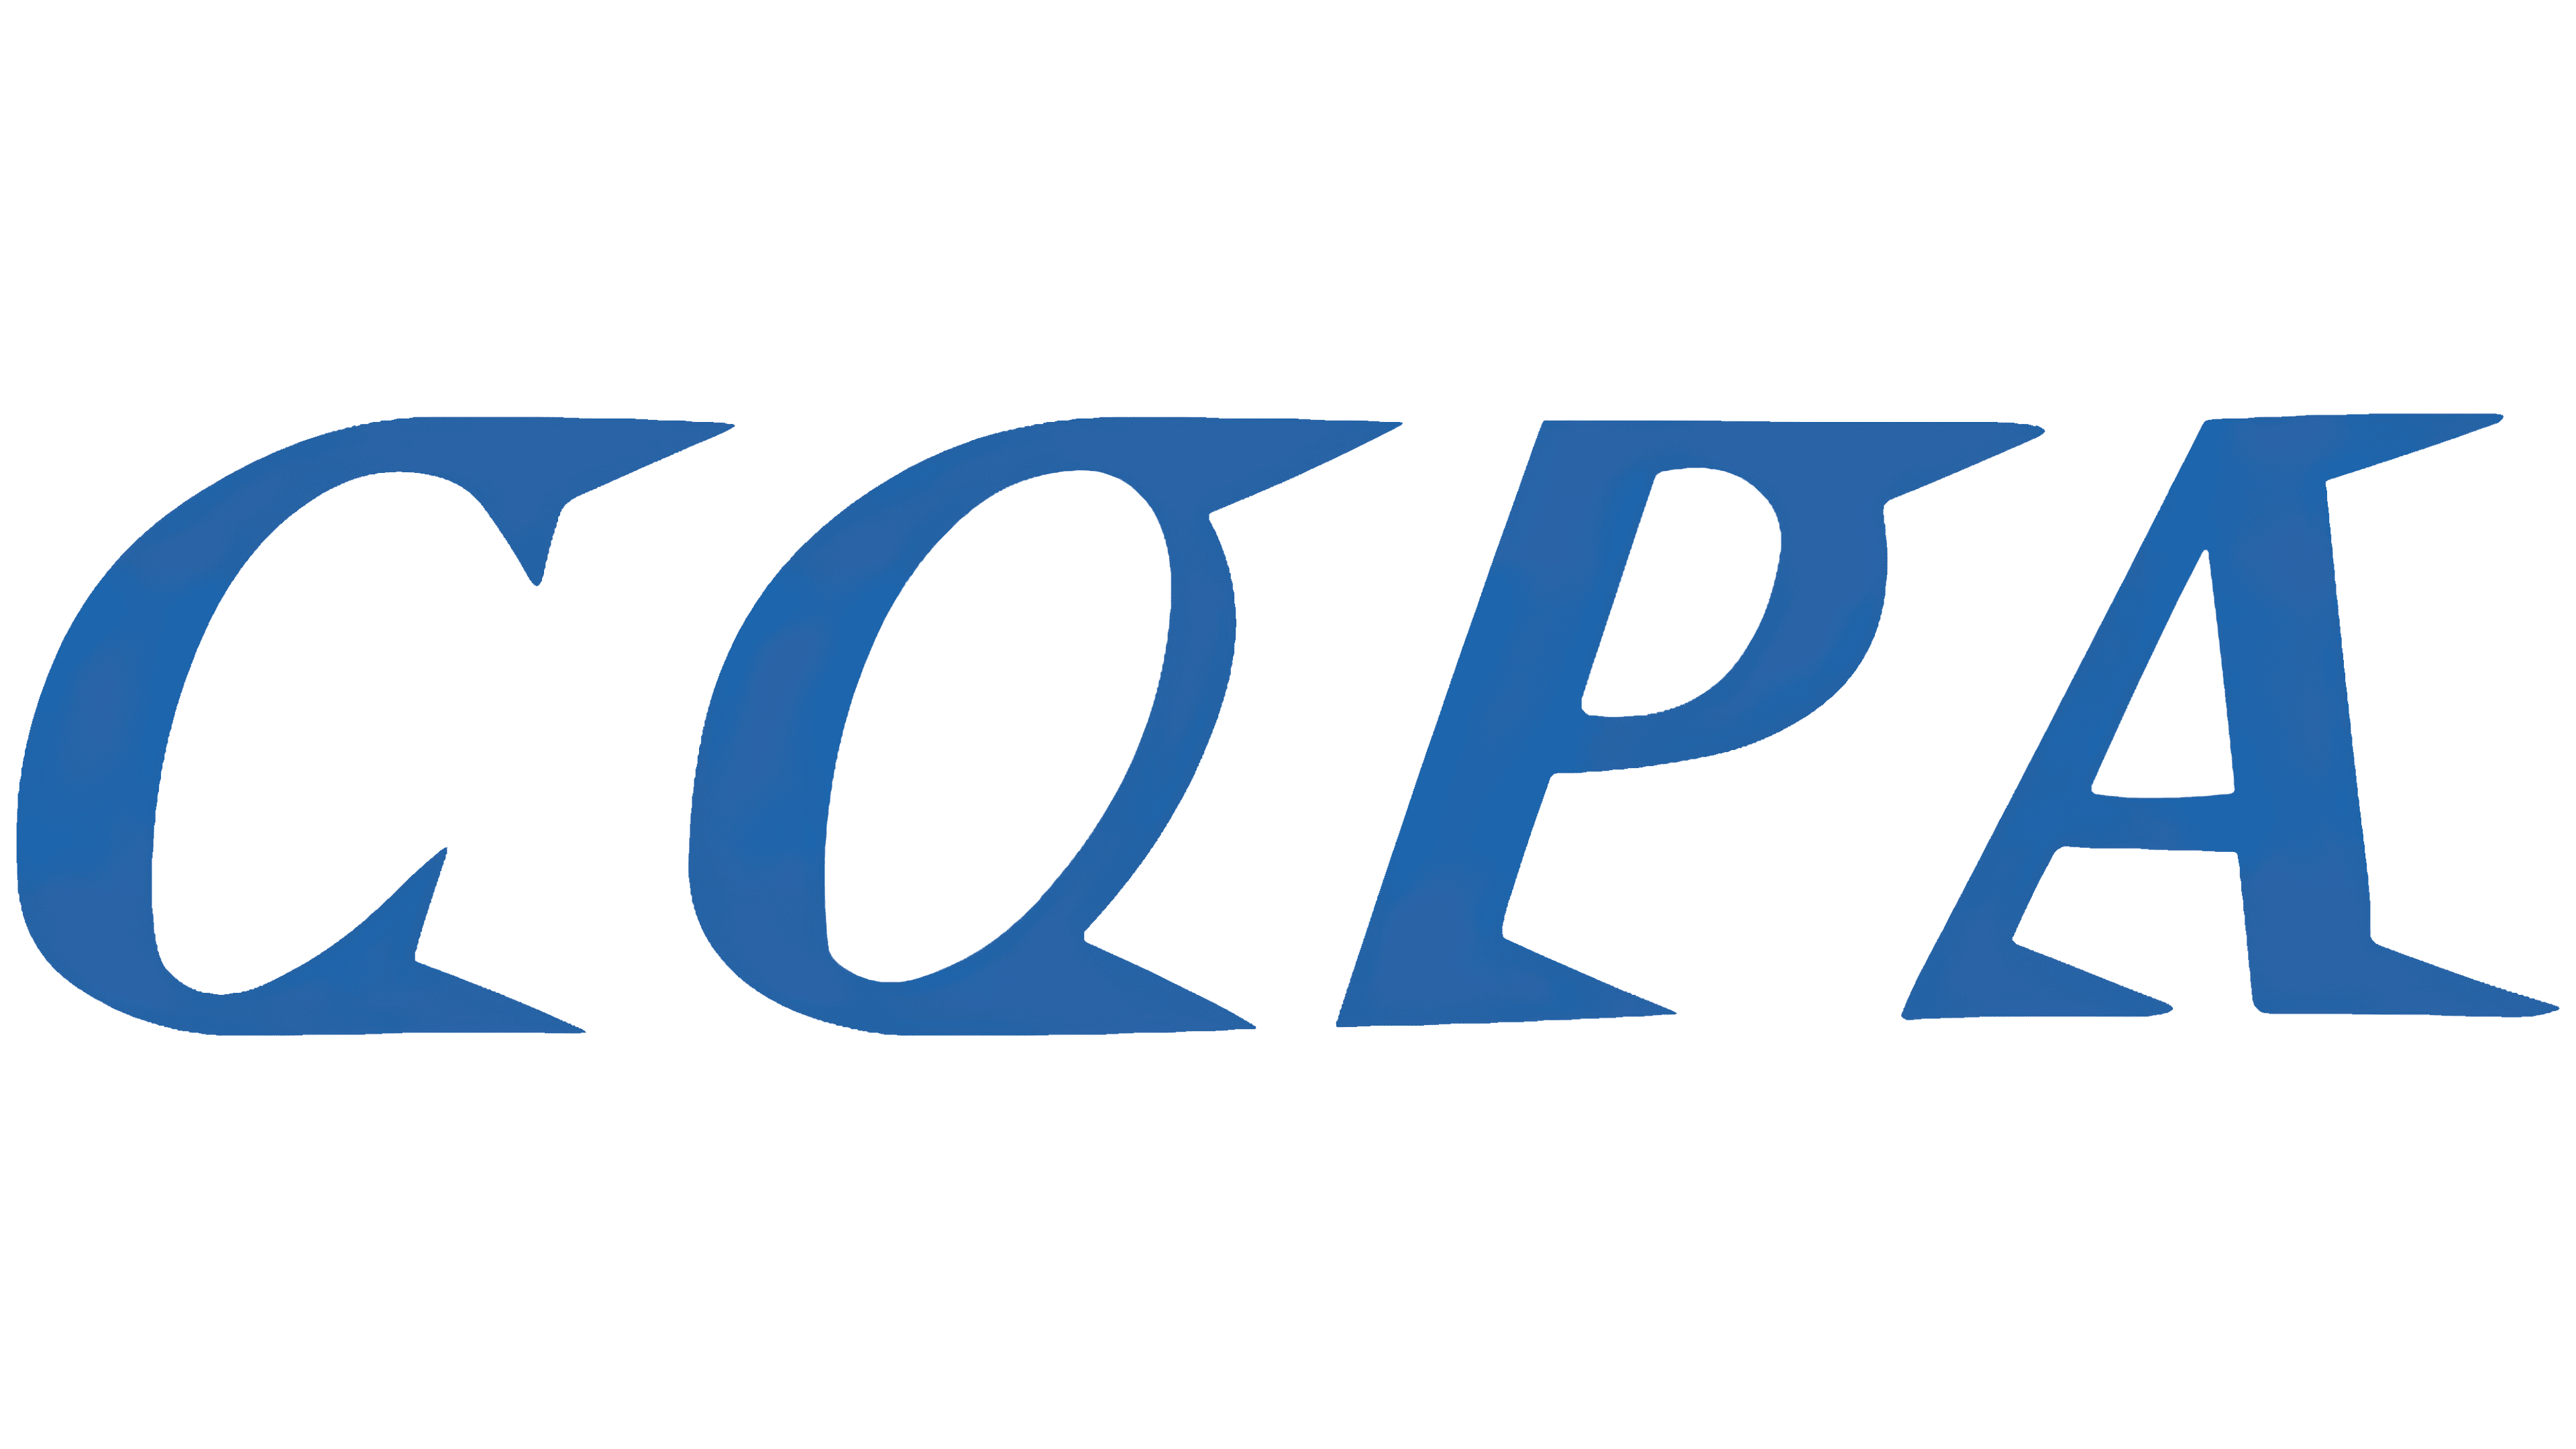 Copa Airlines Logo, symbol, meaning, history, PNG, brand